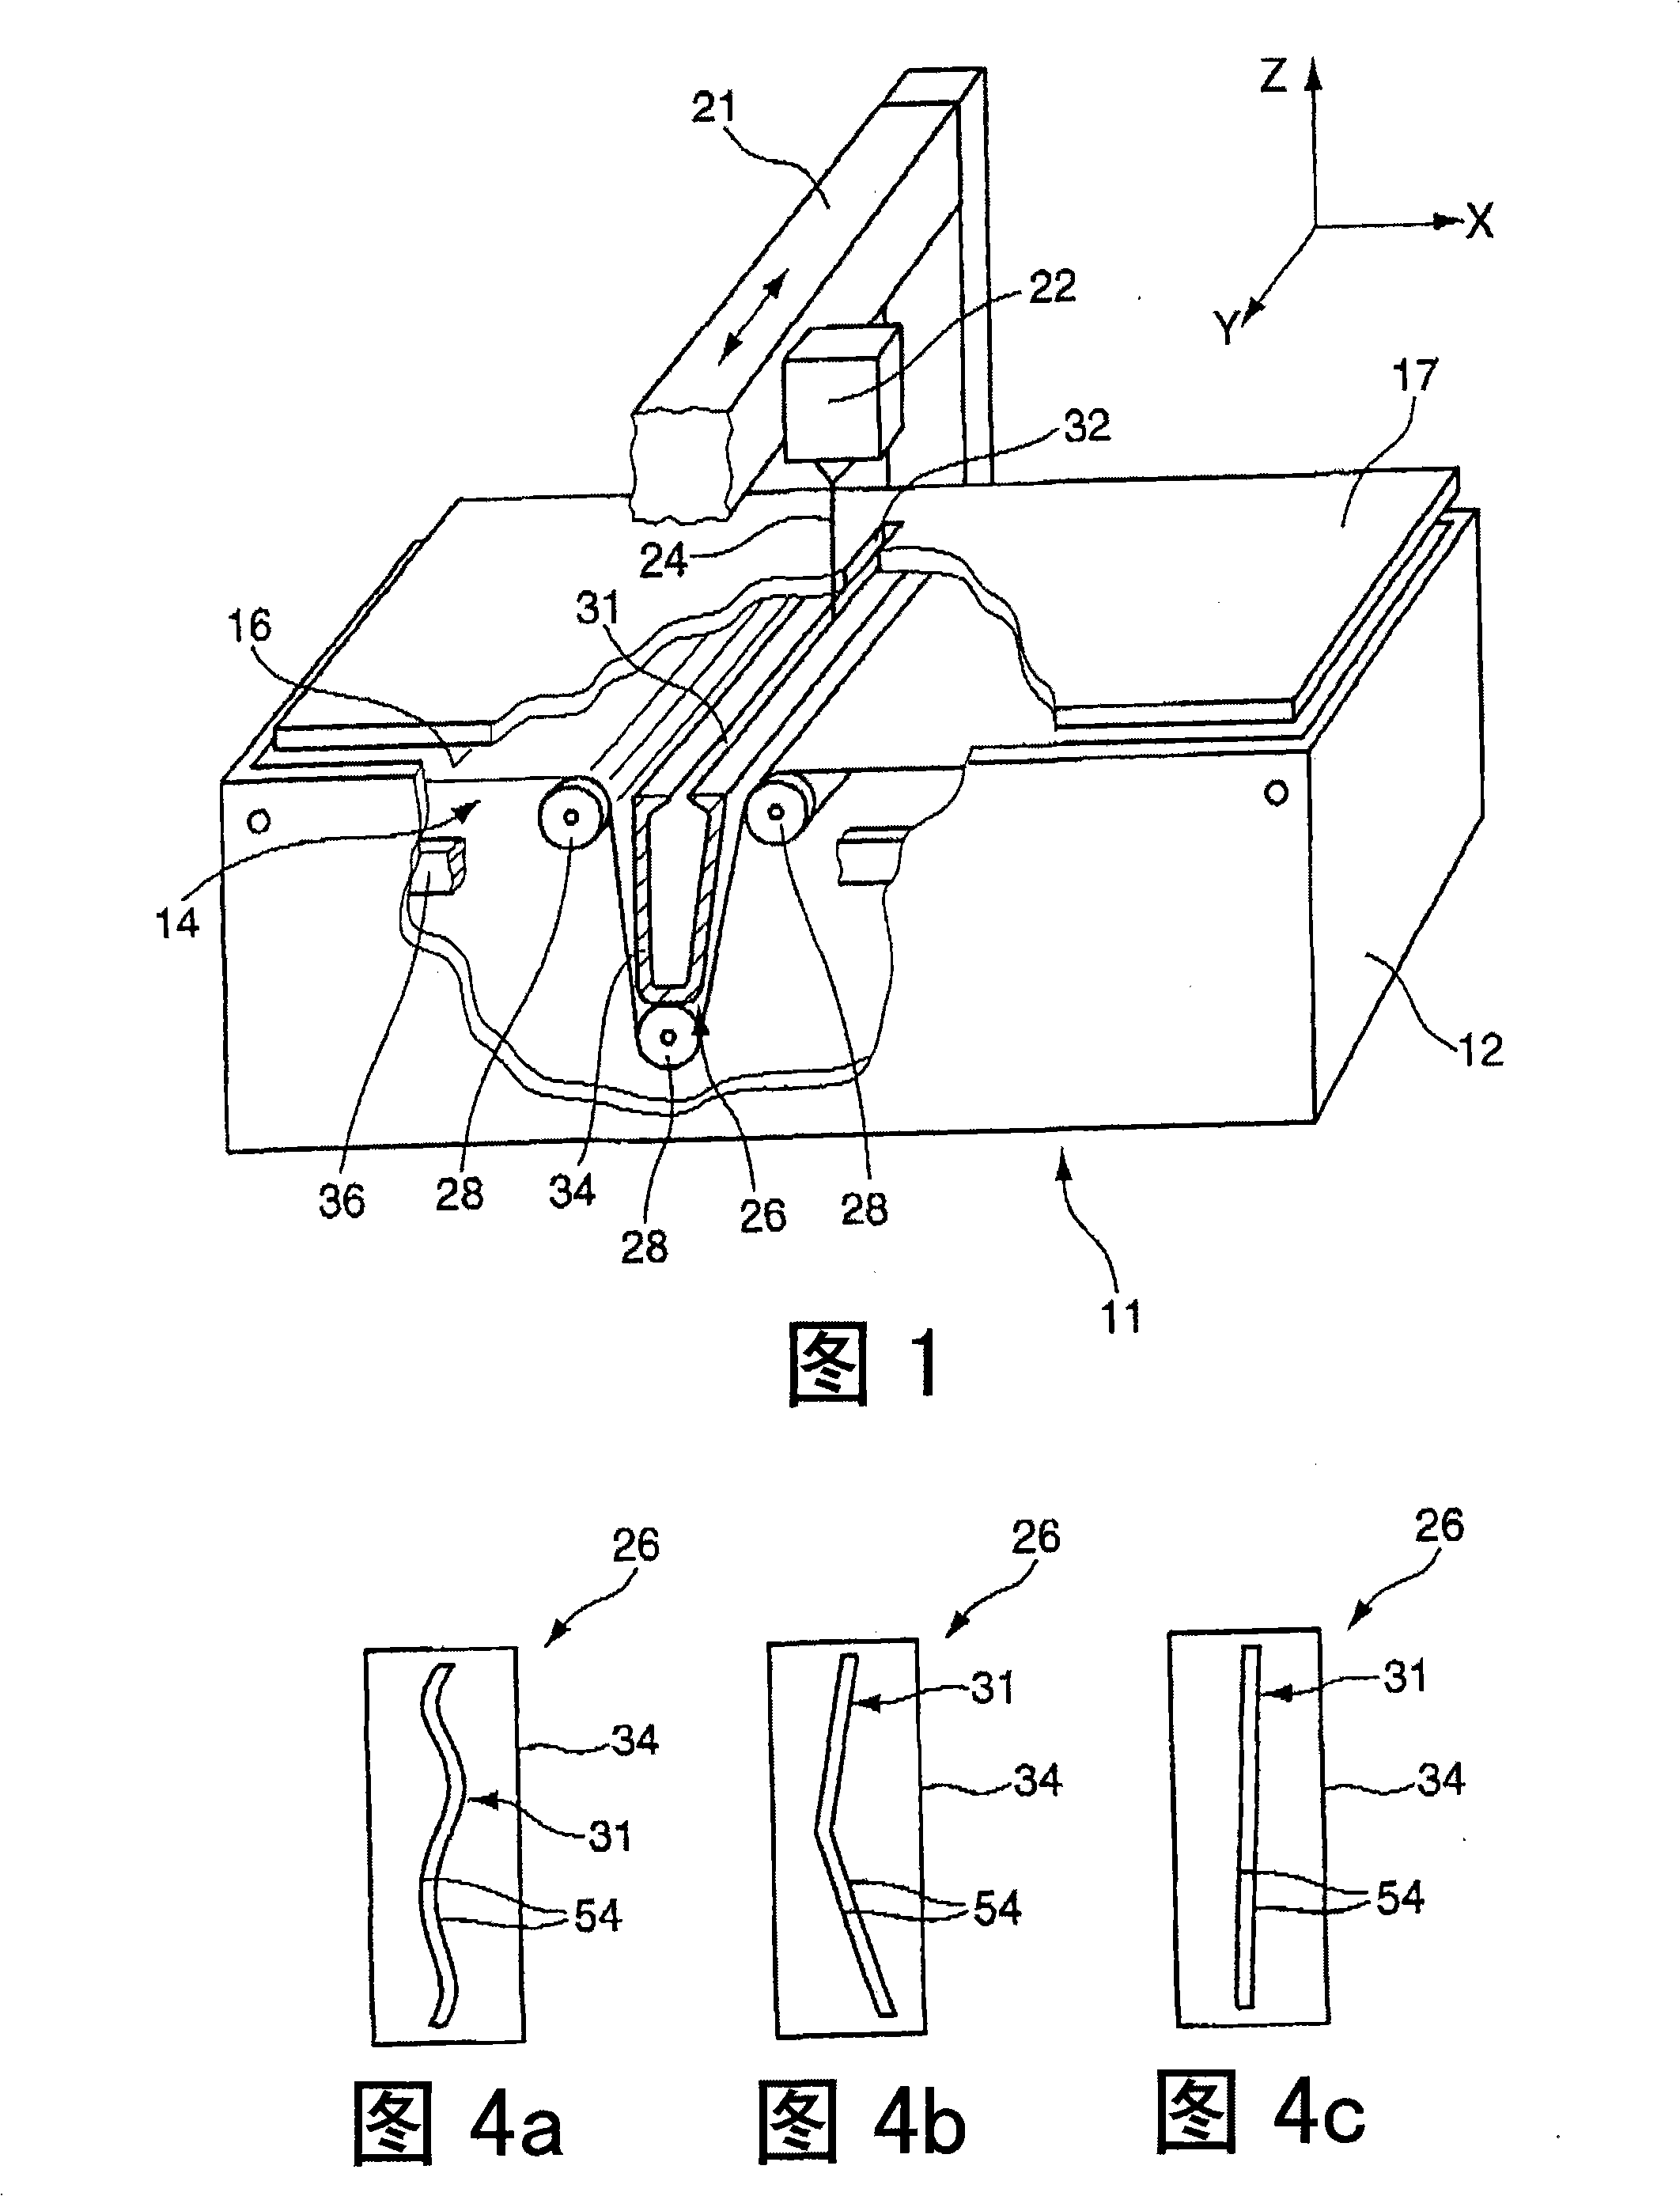 Beam catching device for a processing machine